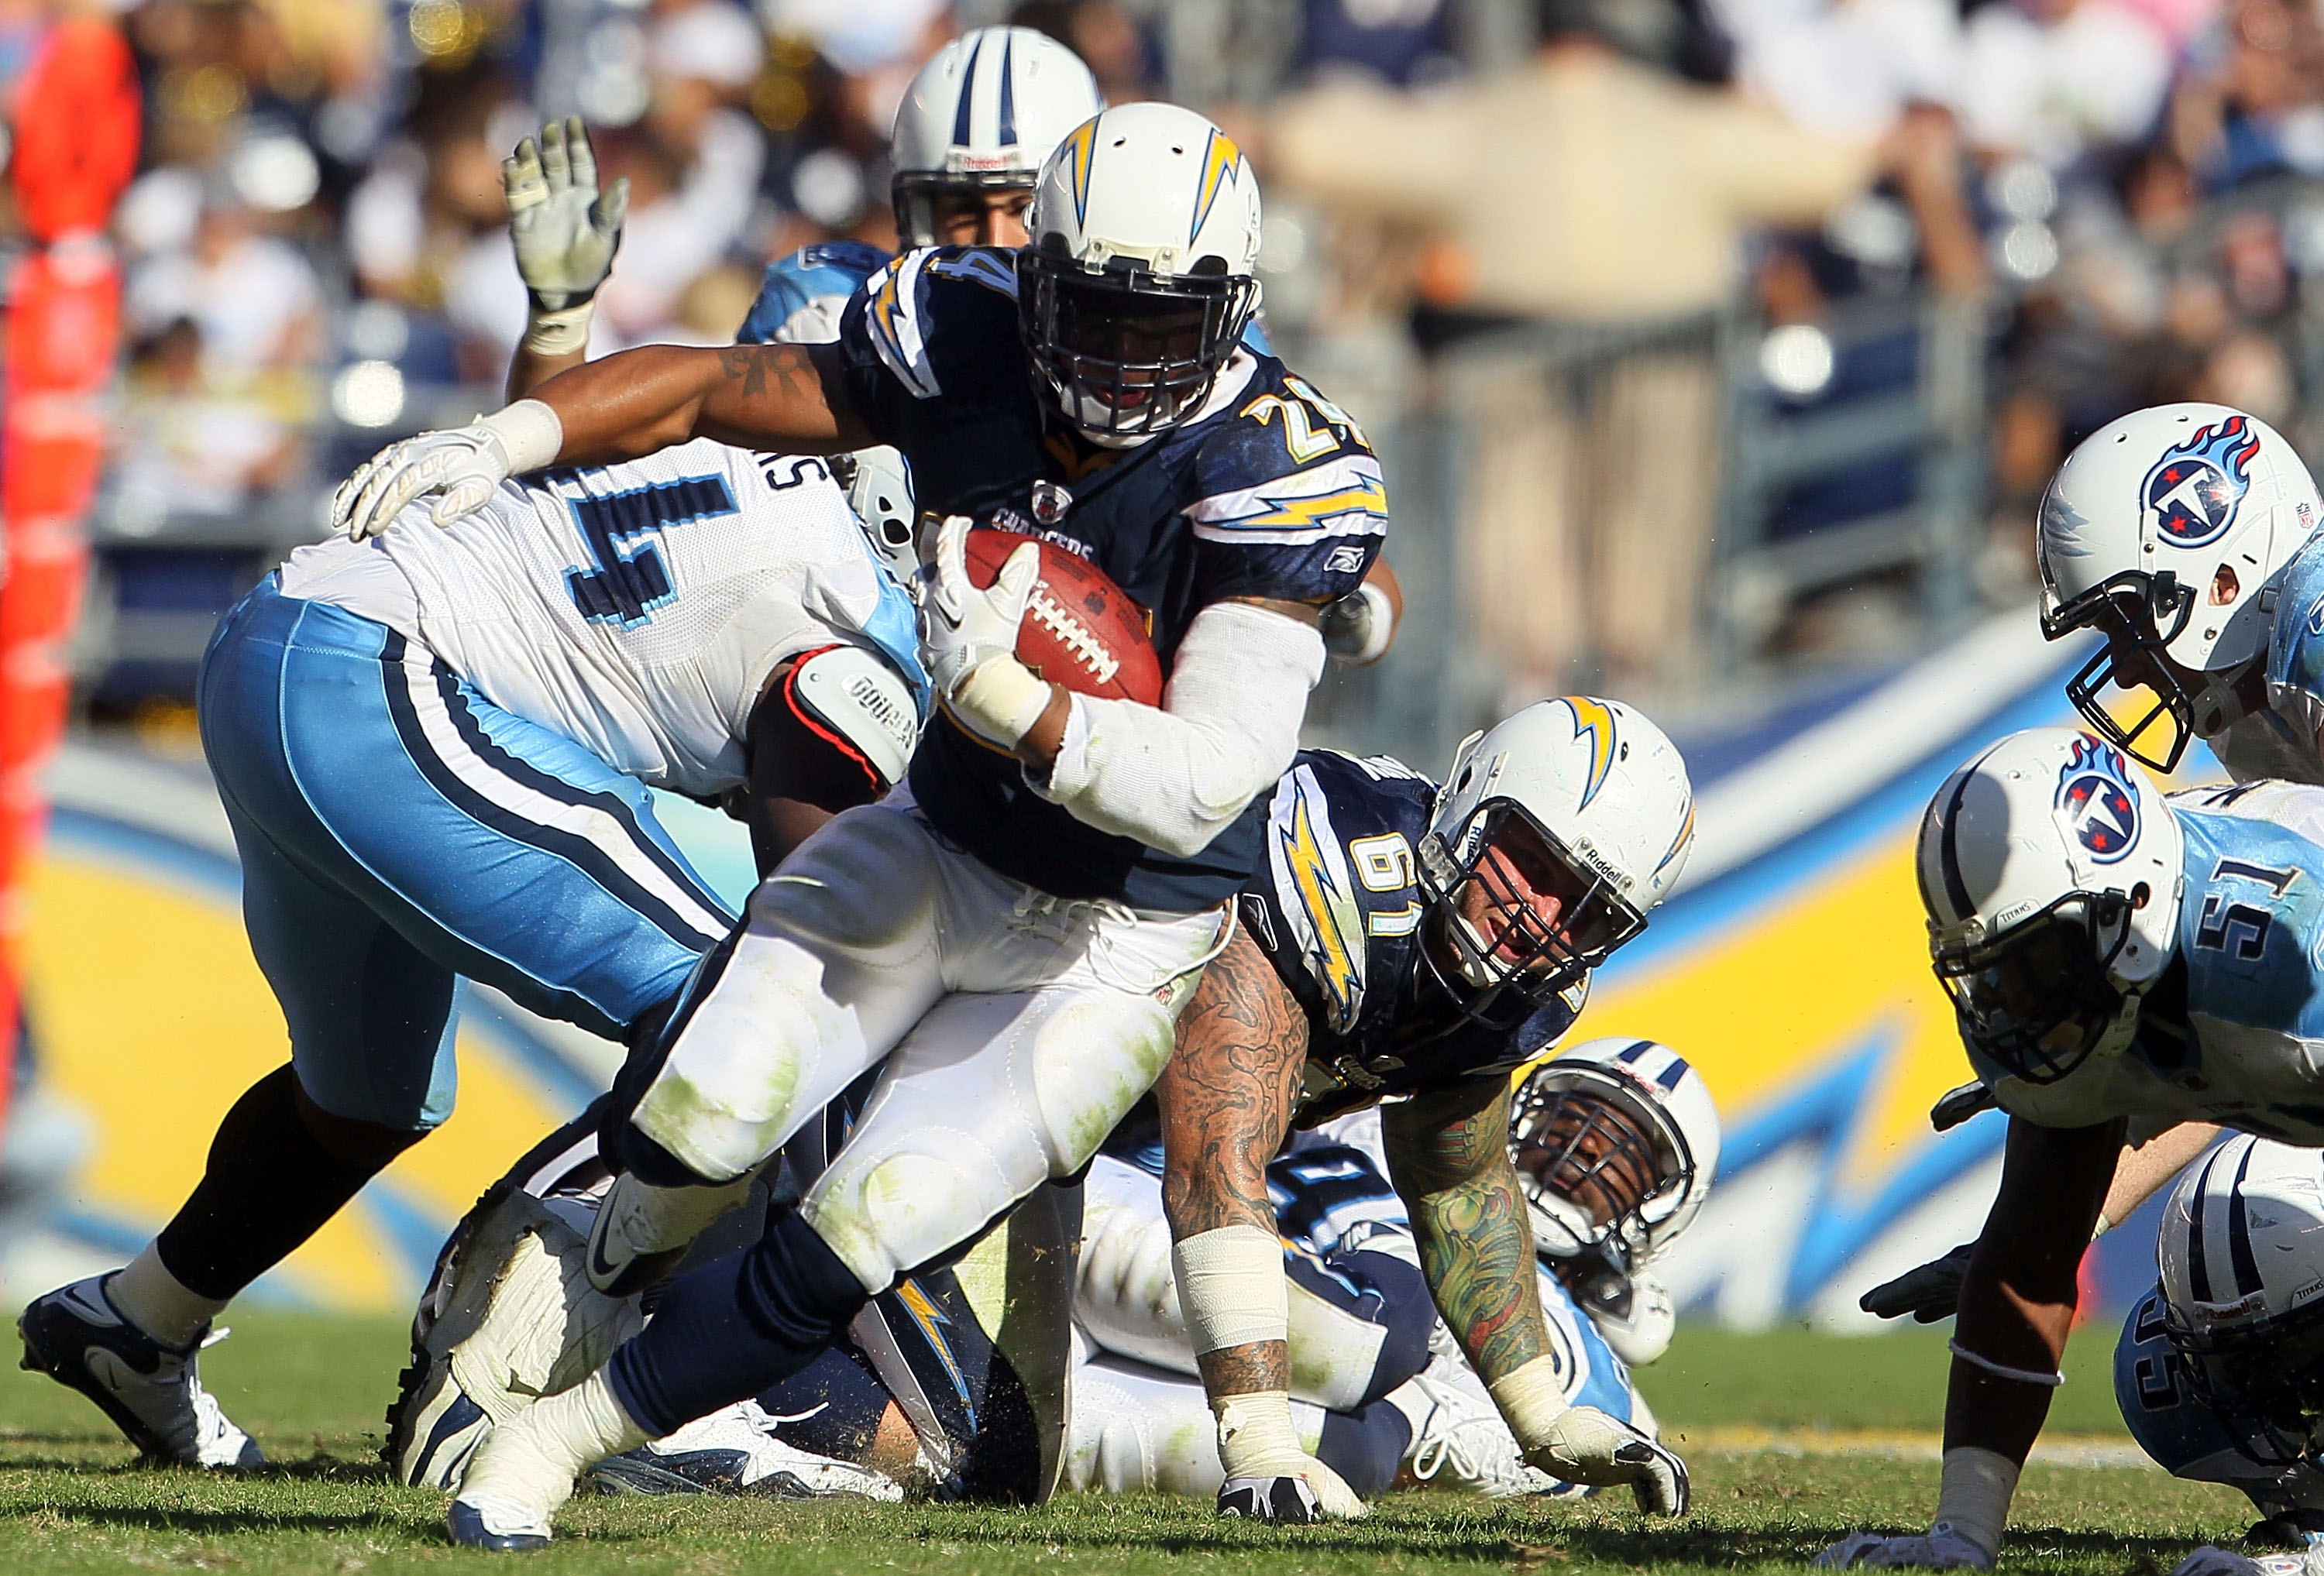 SAN DIEGO - OCTOBER 31:  Running back Ryan Mathews #24 of the San Diego Chargers carries the ball in the fouth quarter against the Tennessee Titans at Qualcomm Stadium on October 31, 2010 in San Diego, California. The Chargers defeated the Titans 33-25.